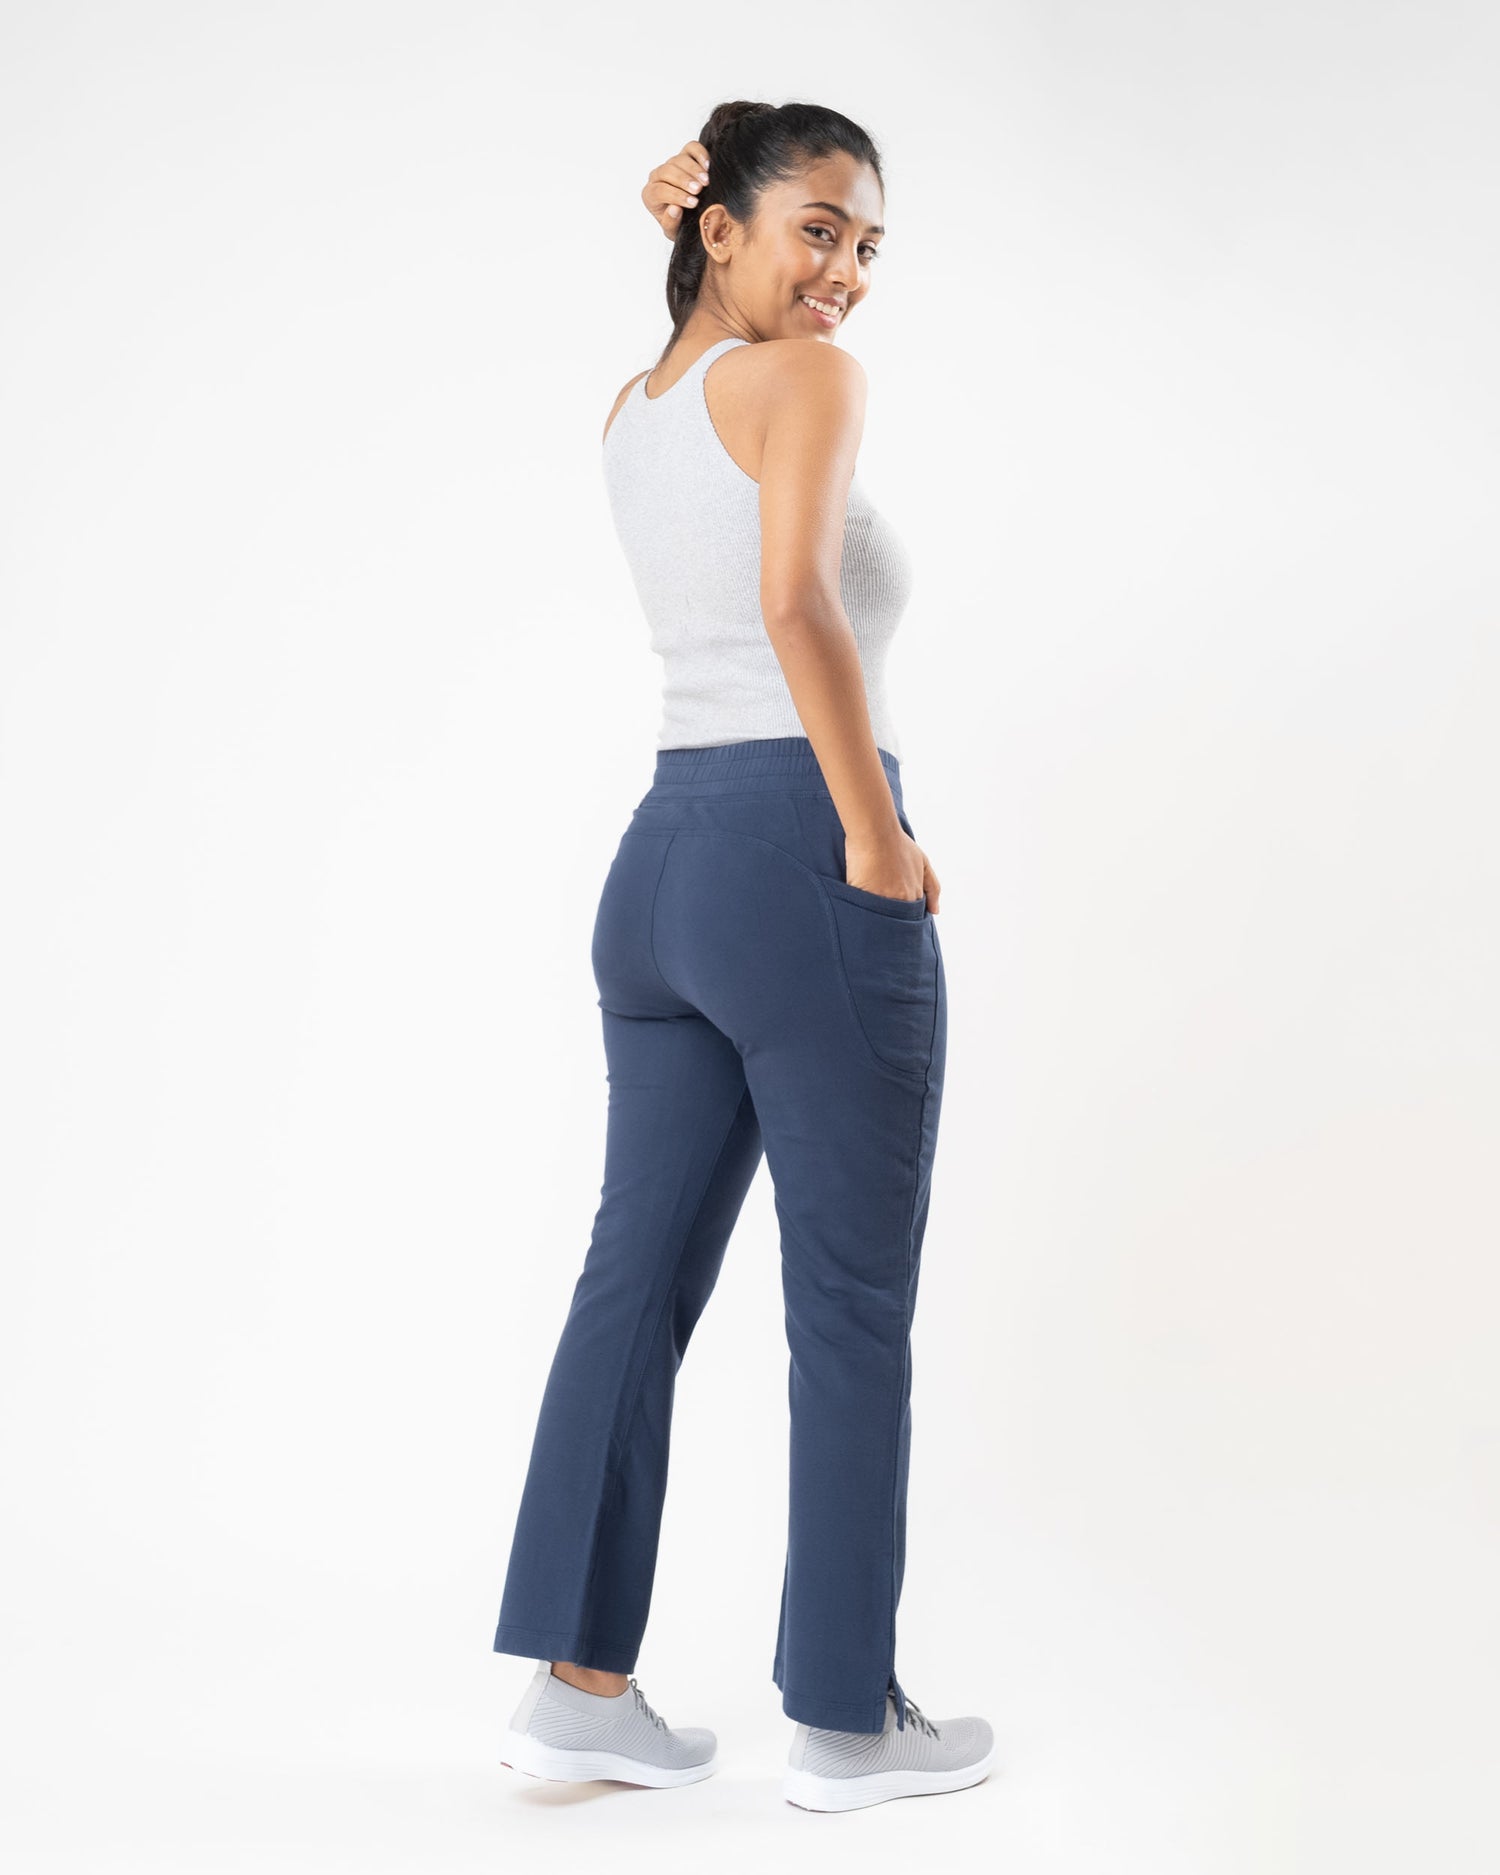 SHE PURE LUXURY WEAR SUMMER PANTS COTTON STRETCH FOR LADIES AND GIRLS AT  BEST RATES